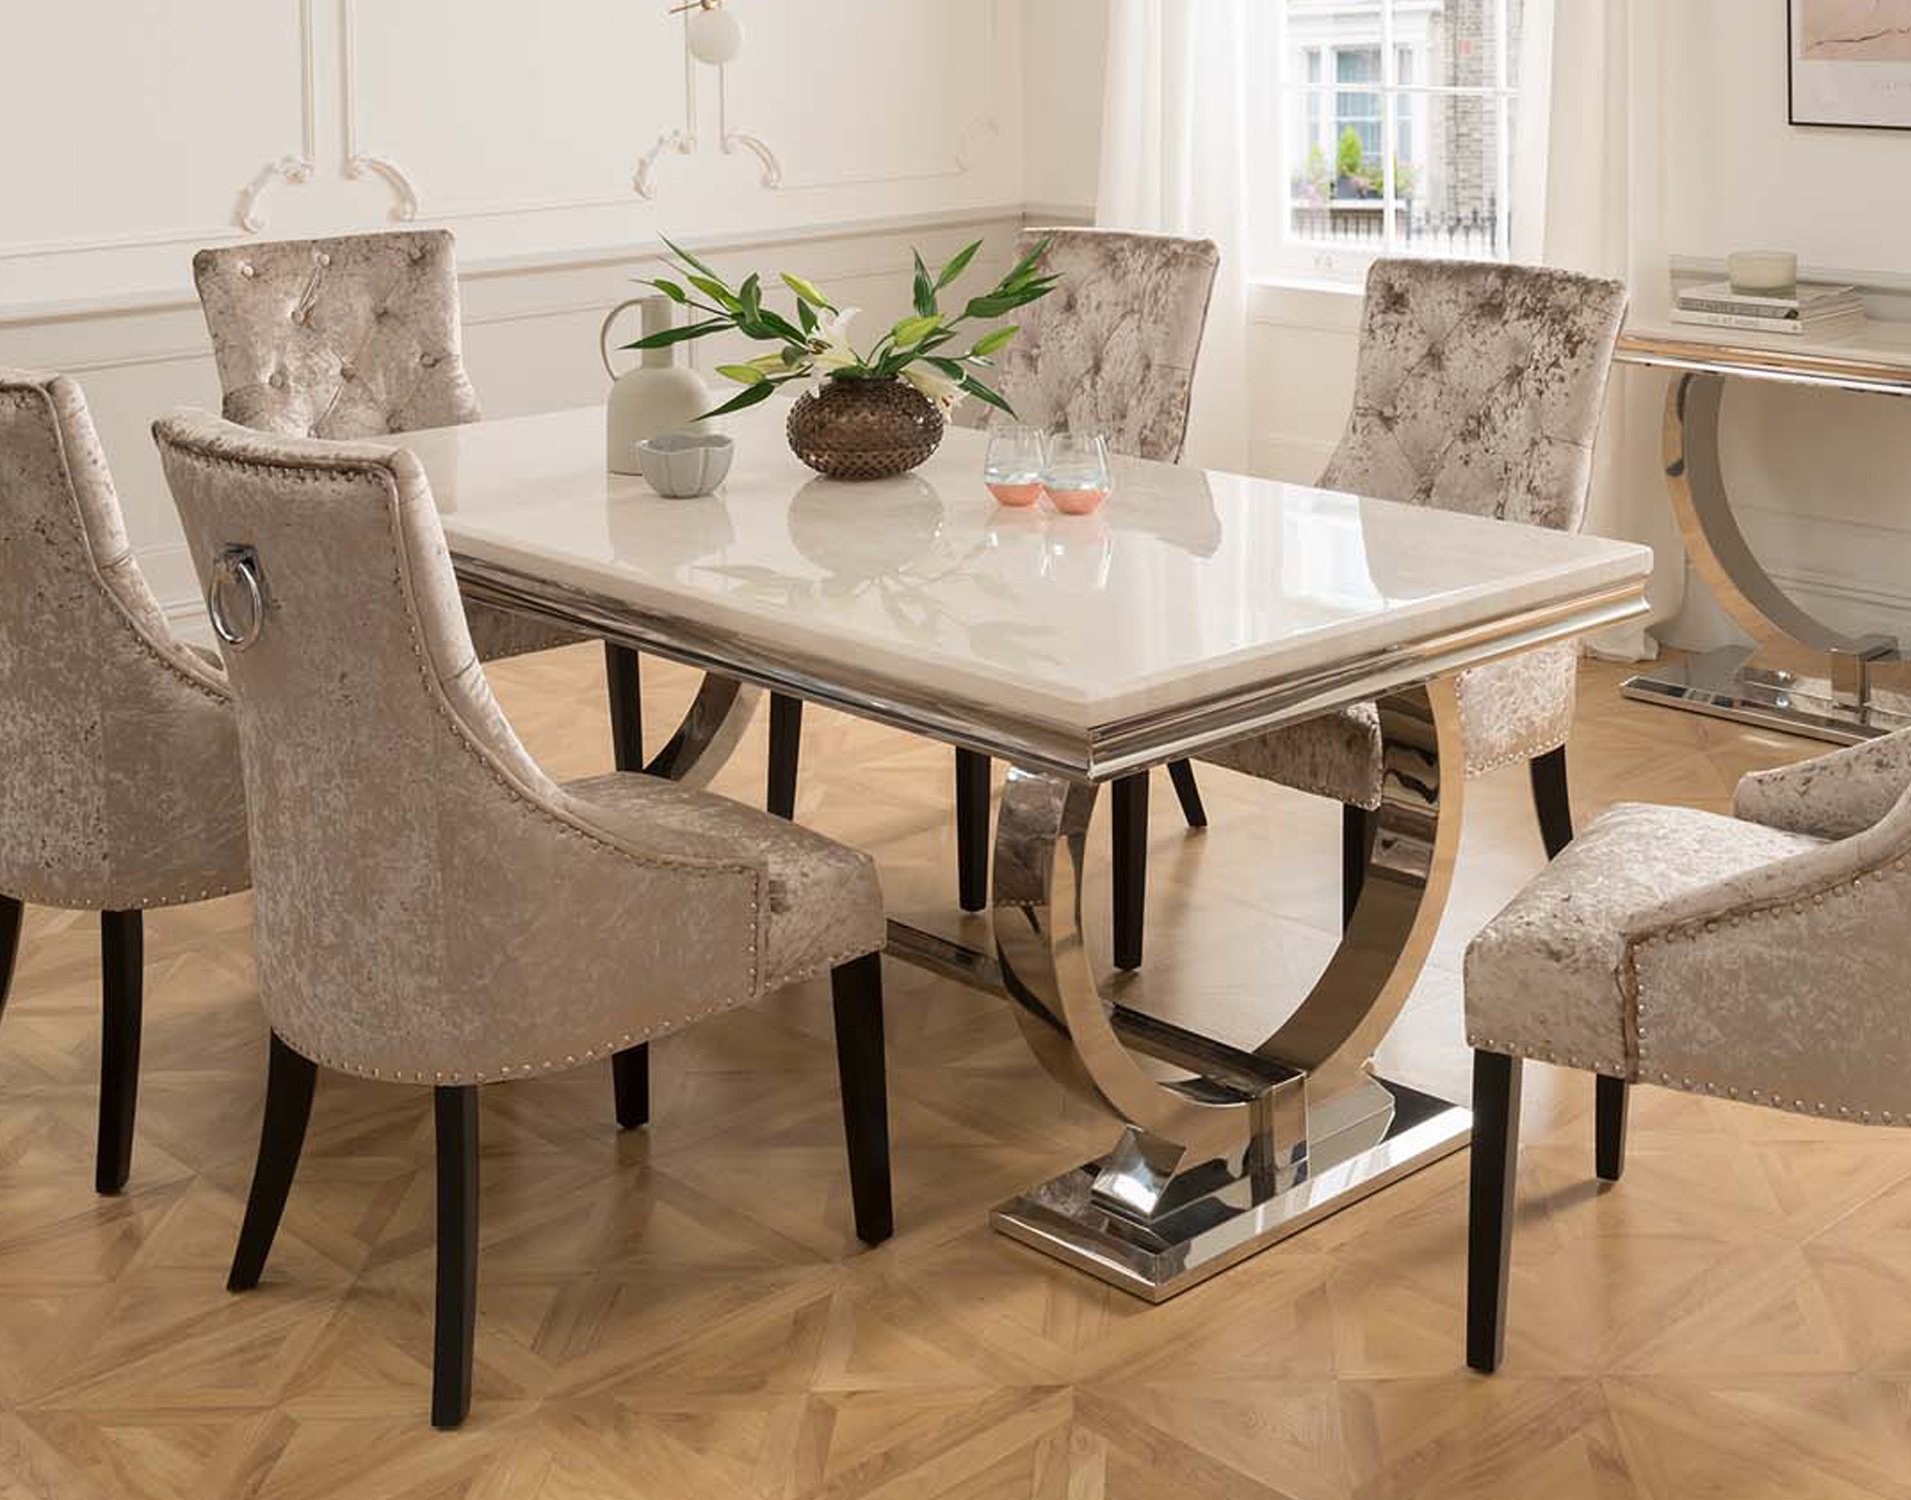 cream colored dining room table